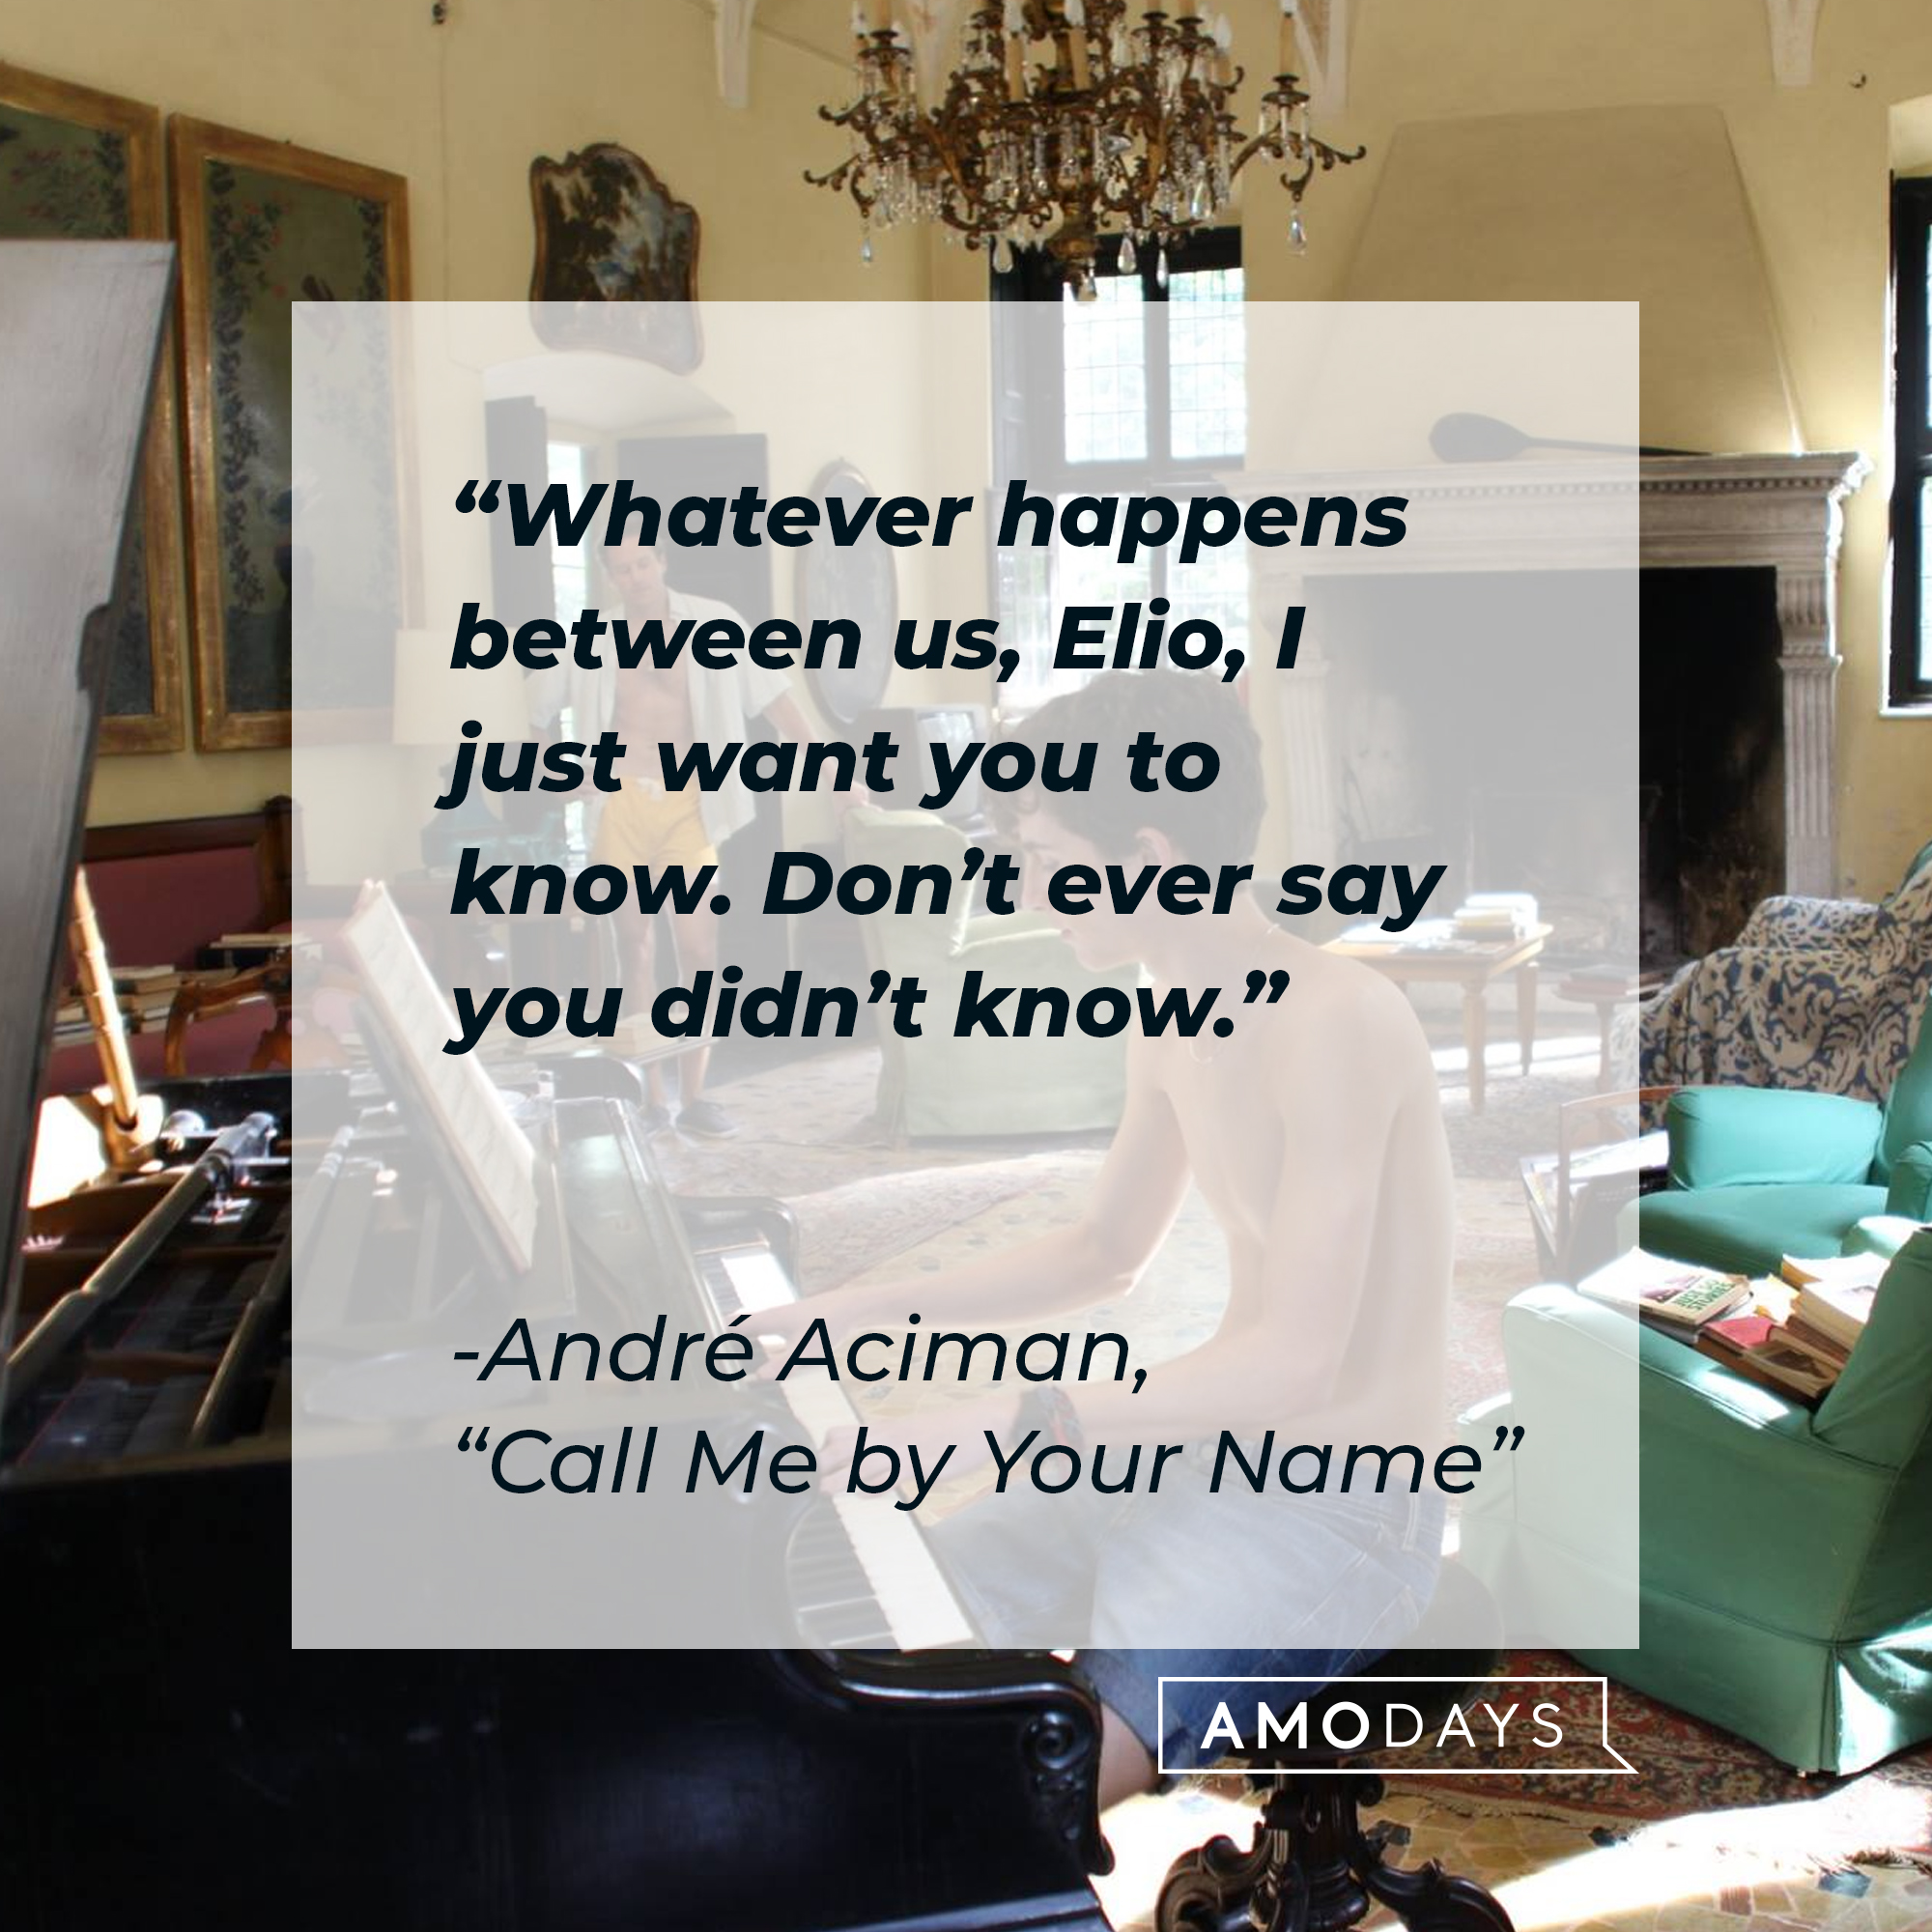 The character Elio from the film “Call Me By Your Name,” with a quote by the author, André Aciman, from the book it’s based on: “Whatever happens between us, Elio, I just want you to know. Don’t ever say you didn’t know.” | Source: Facebook.com/CallMeByYourNameFilm